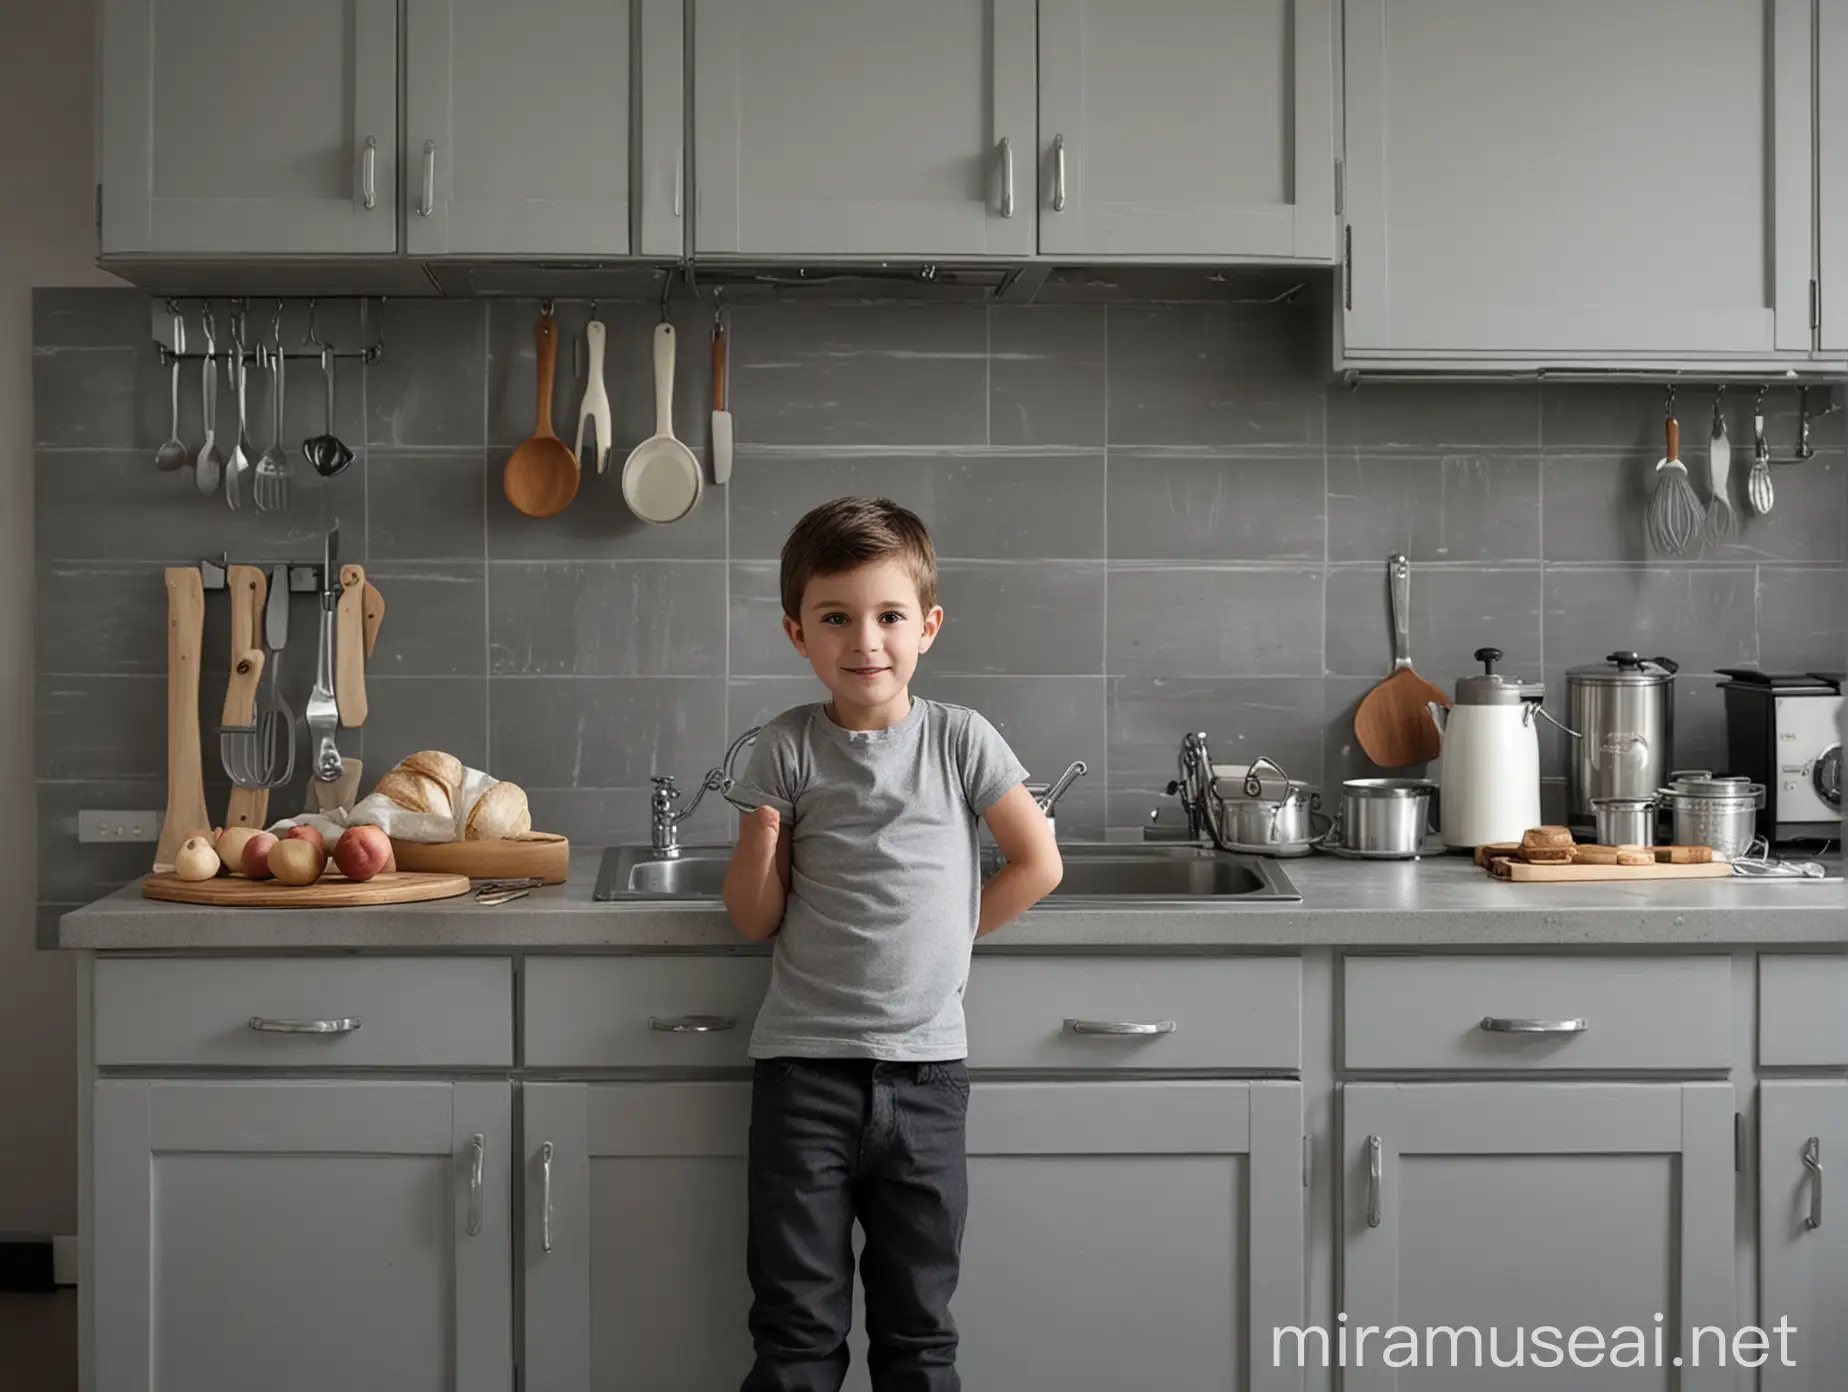 A child who loves to be in the kitchen, the kitchen is in shades of gray